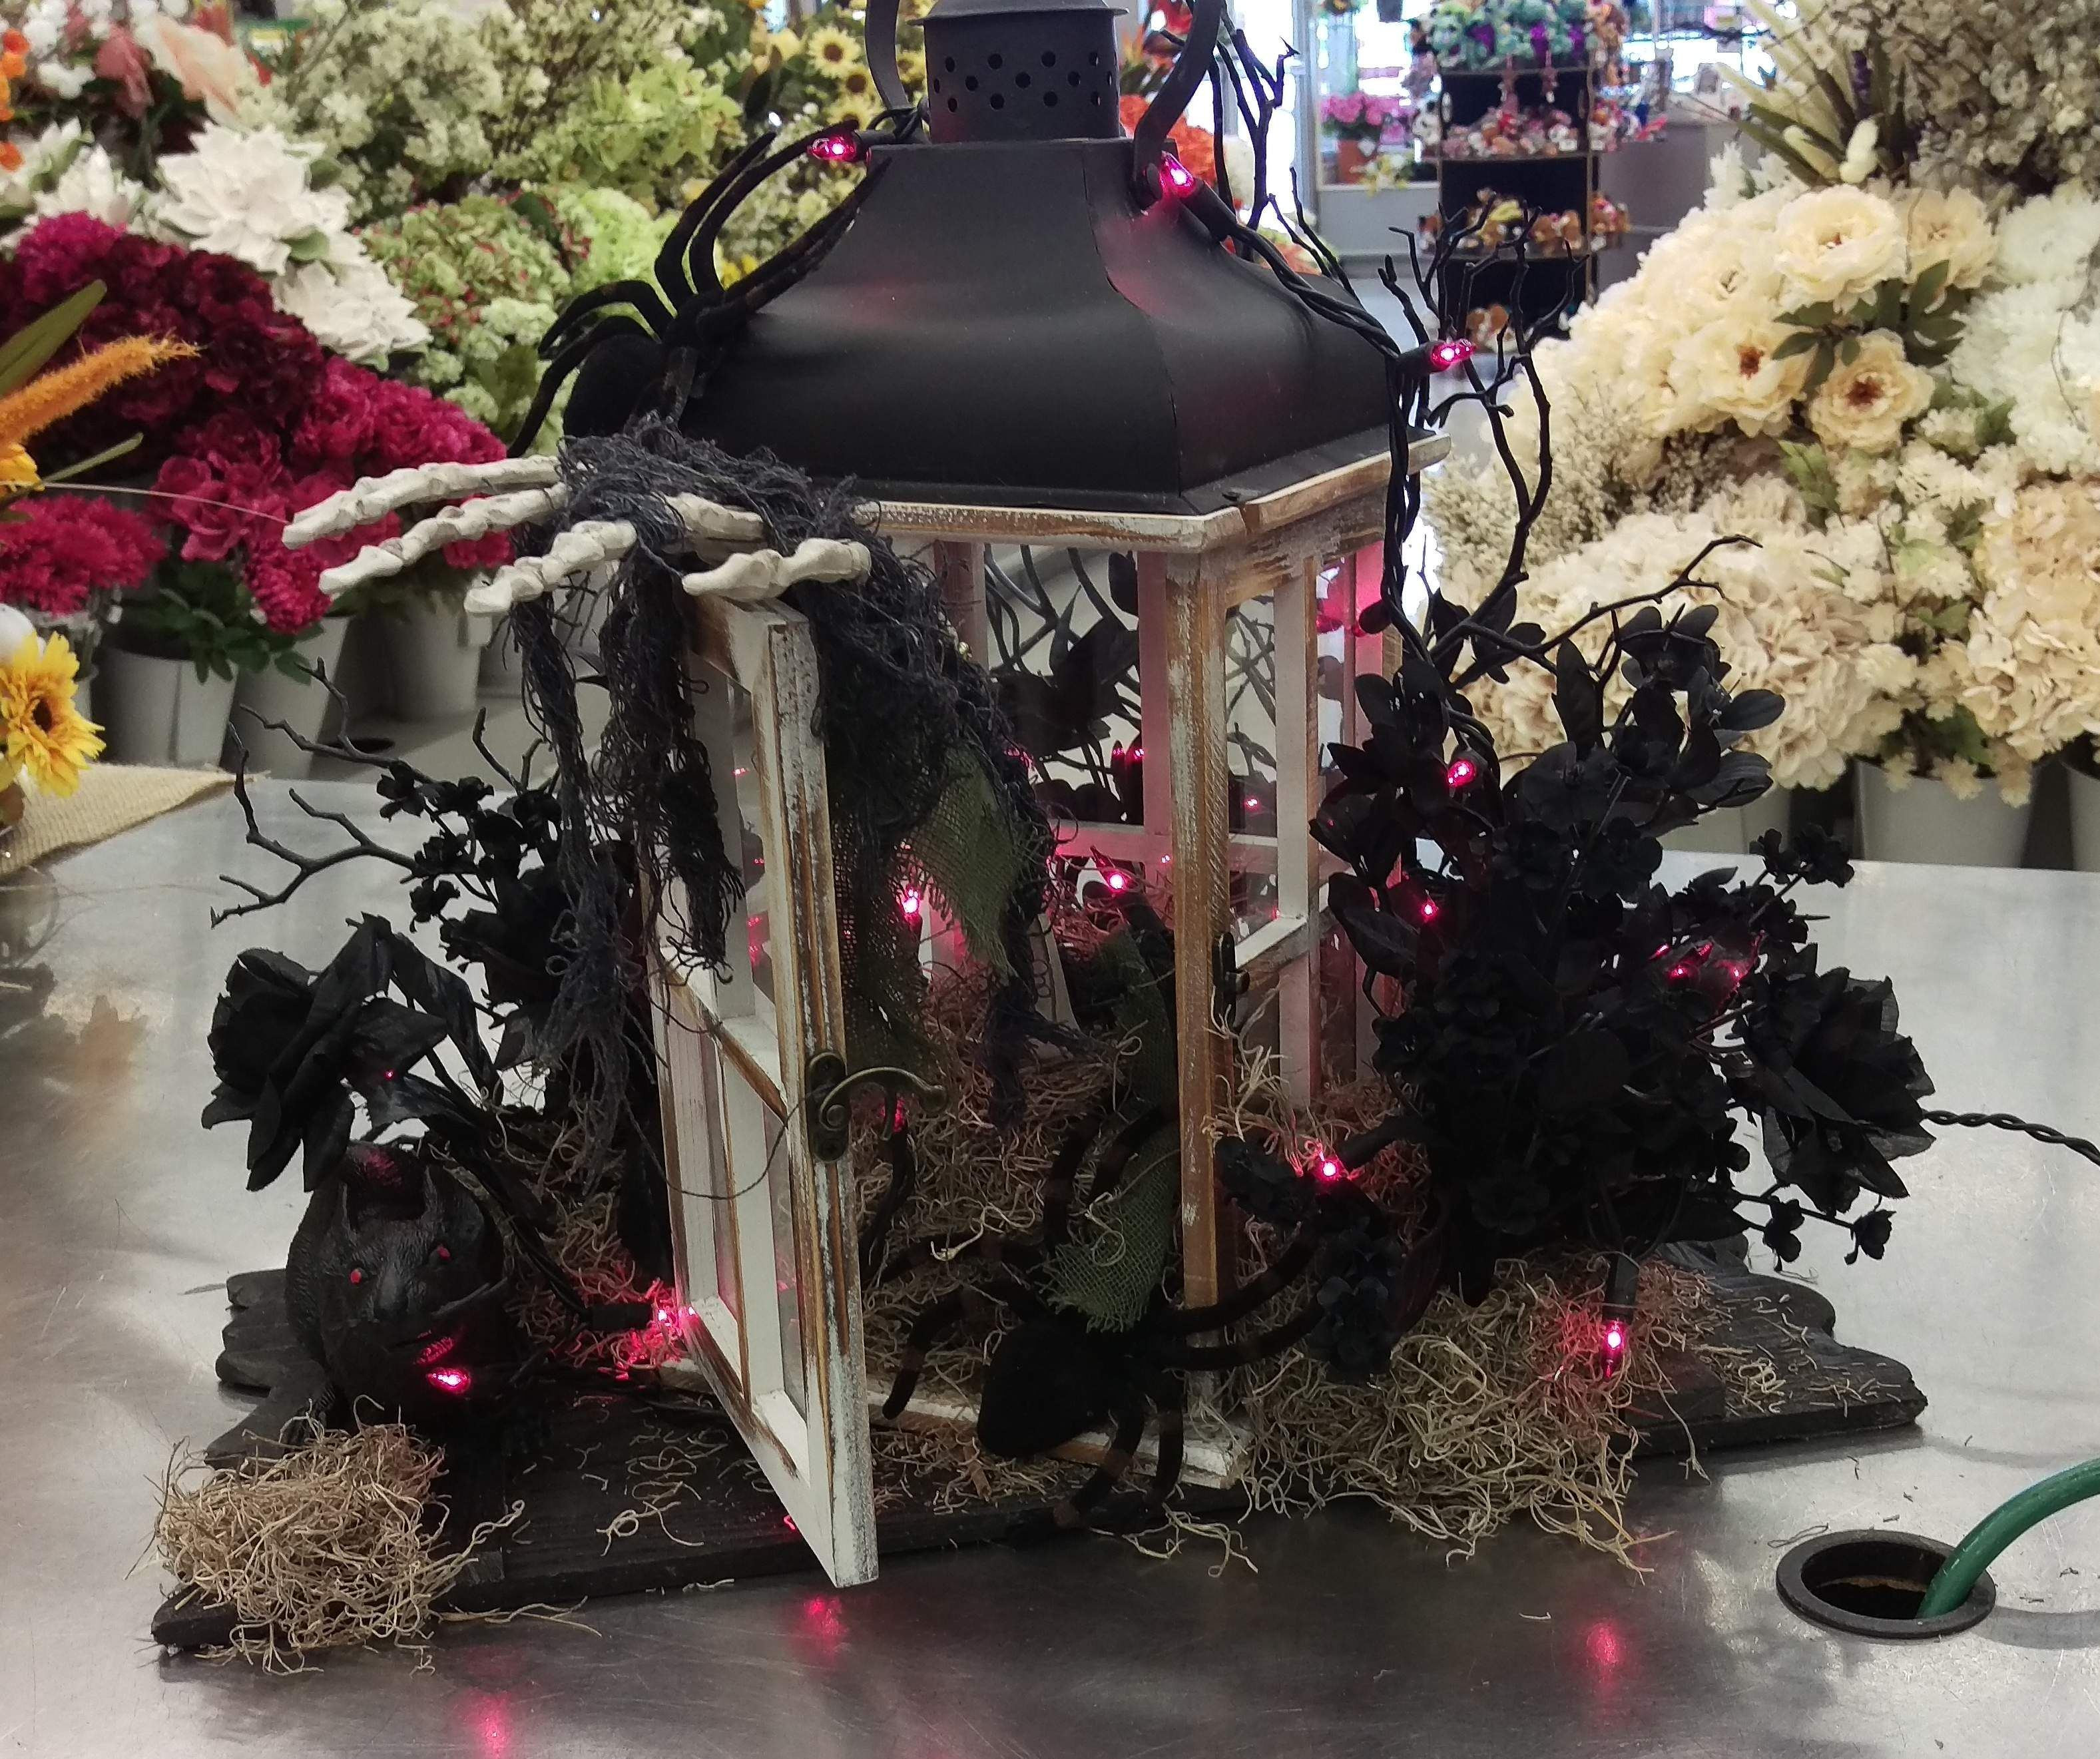 29 Fashionable Small Glass Vases Michaels 2024 free download small glass vases michaels of michaels halloween decorations 2018 intended for fall 2017 by randi sheldon at michaels 1600 types of michaels halloween decorations 2018 of michaels